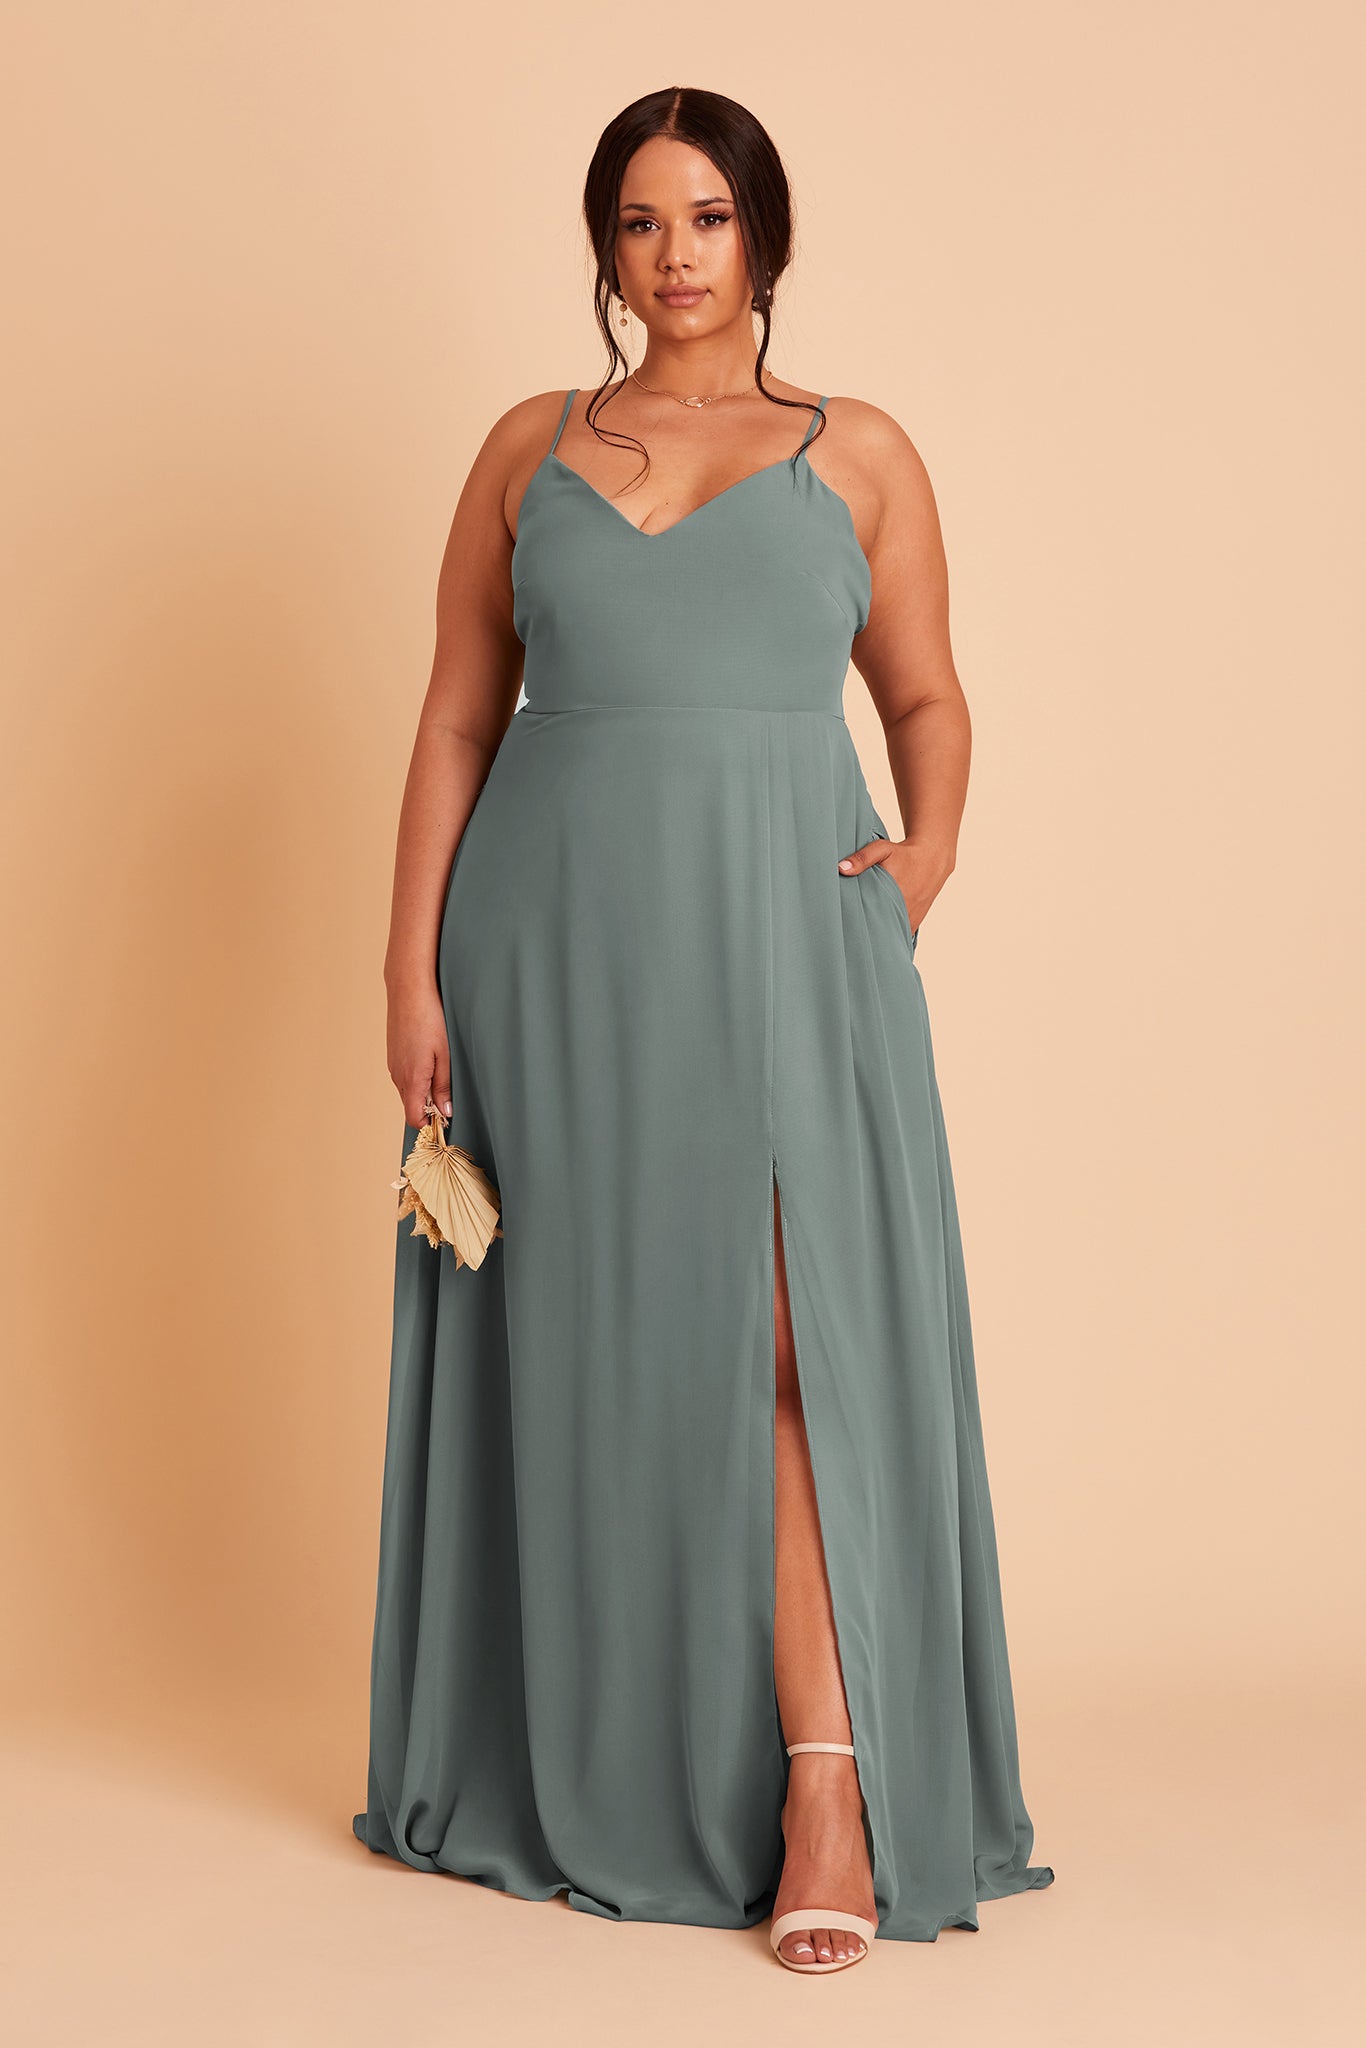 Adelle plus size bridesmaid dress with slit in sea glass green chiffon by Birdy Grey, hand in pocket, front view